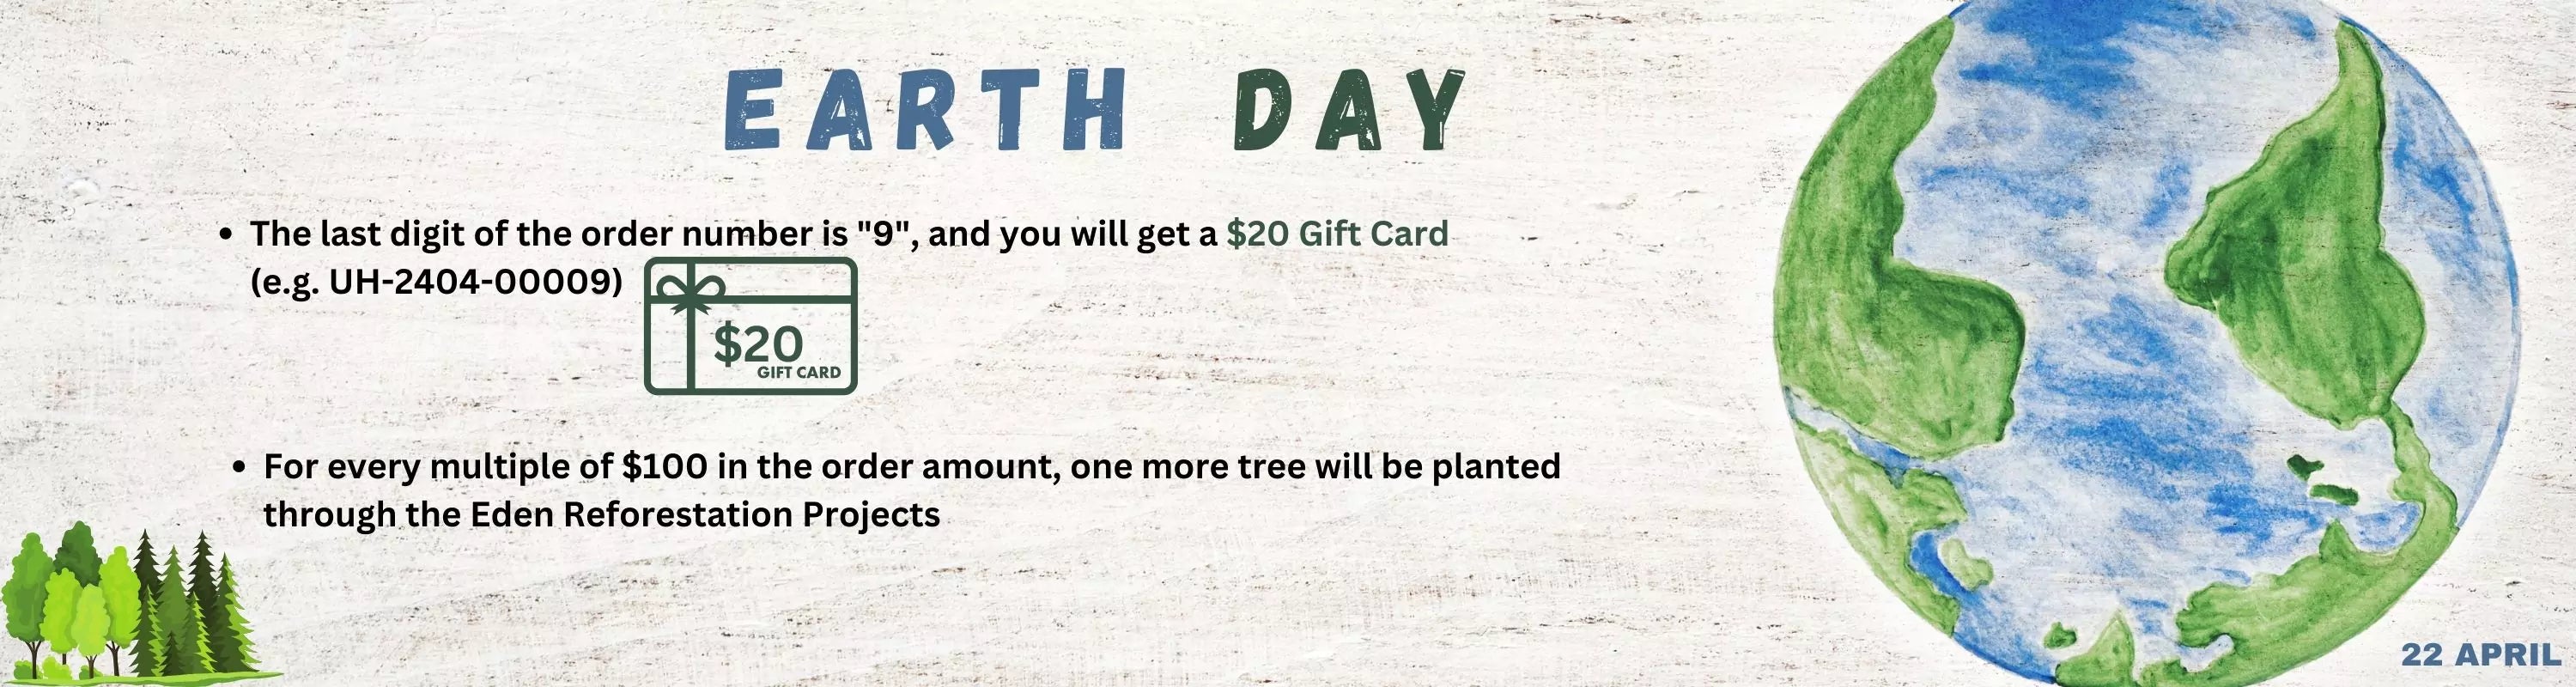 ugeat earth day sale